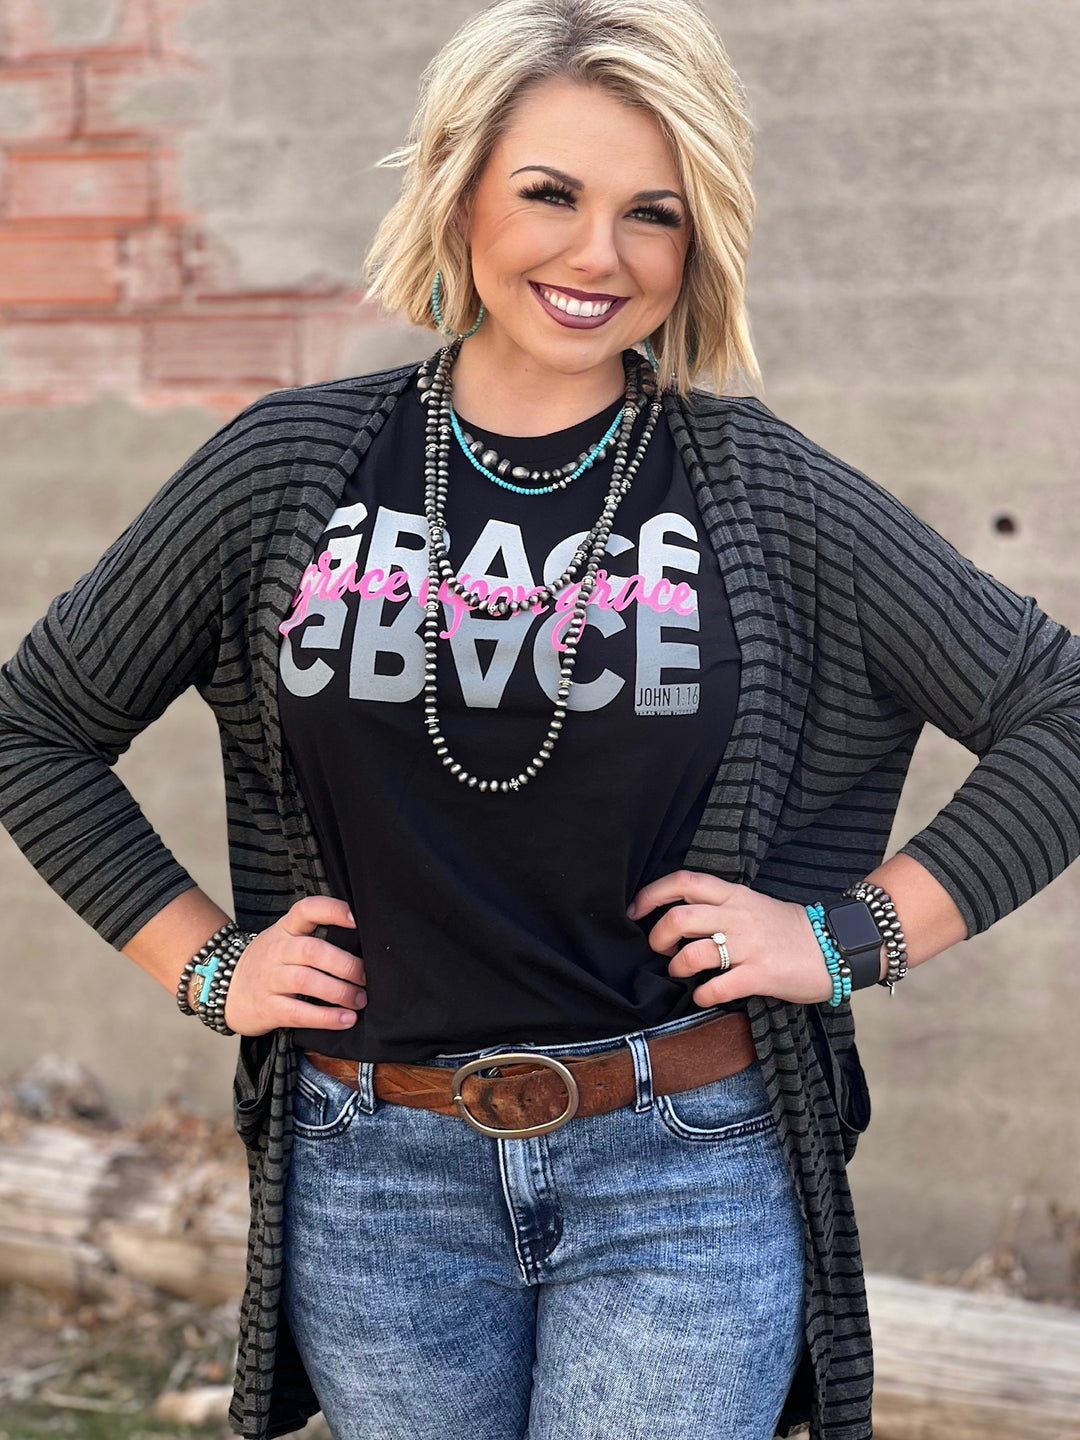 Grace Upon Grace Tee by Texas True Threads